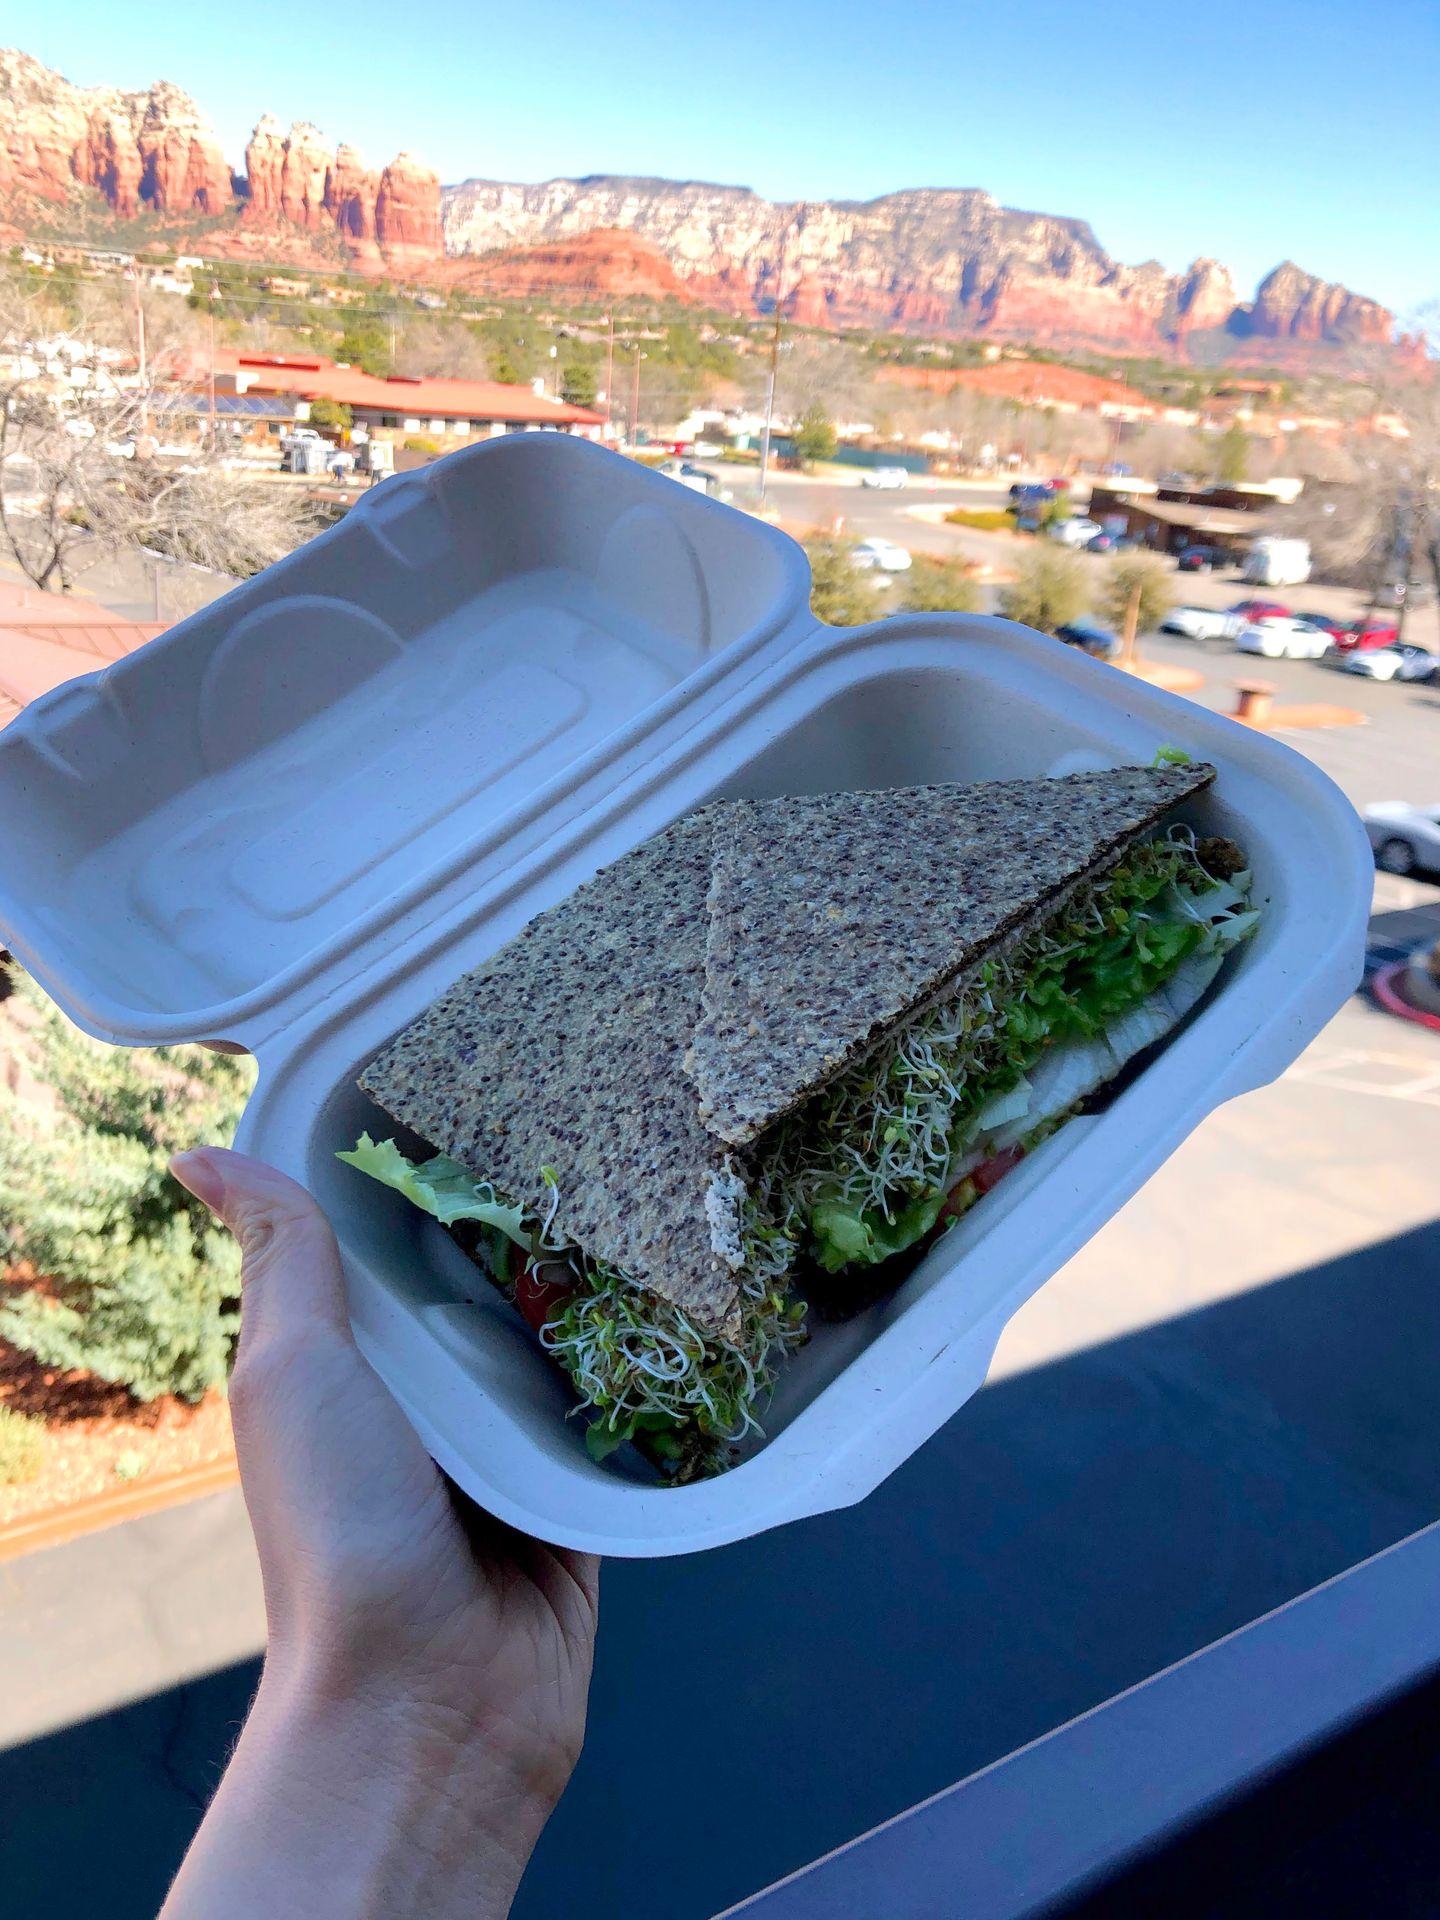 A sandwich in a to-go box with thin bread, green sprouts and other veggies.